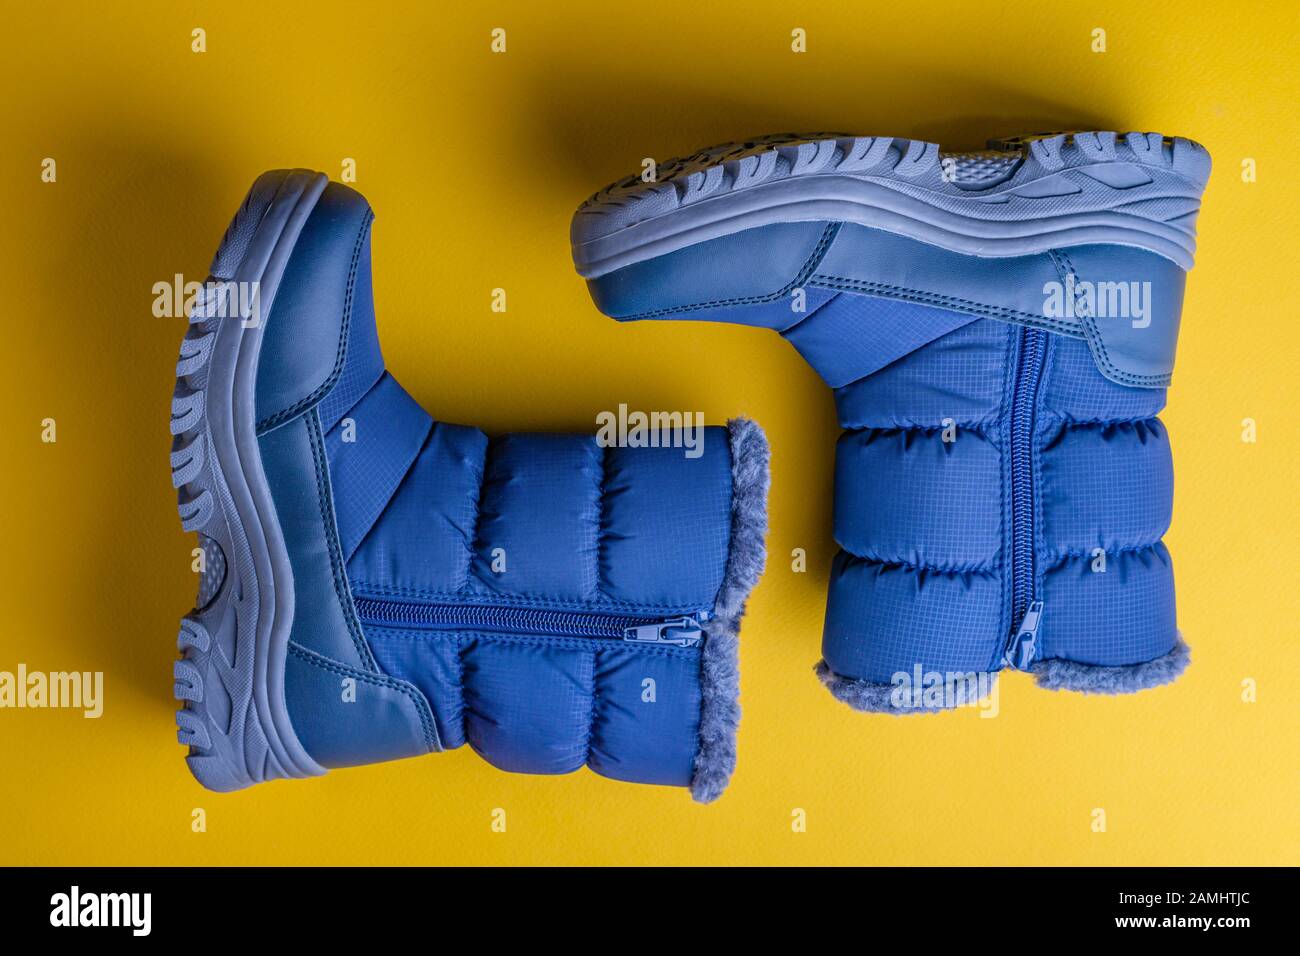 Winter water-repellent boots in blue with a gray sole on a yellow background Stock Photo